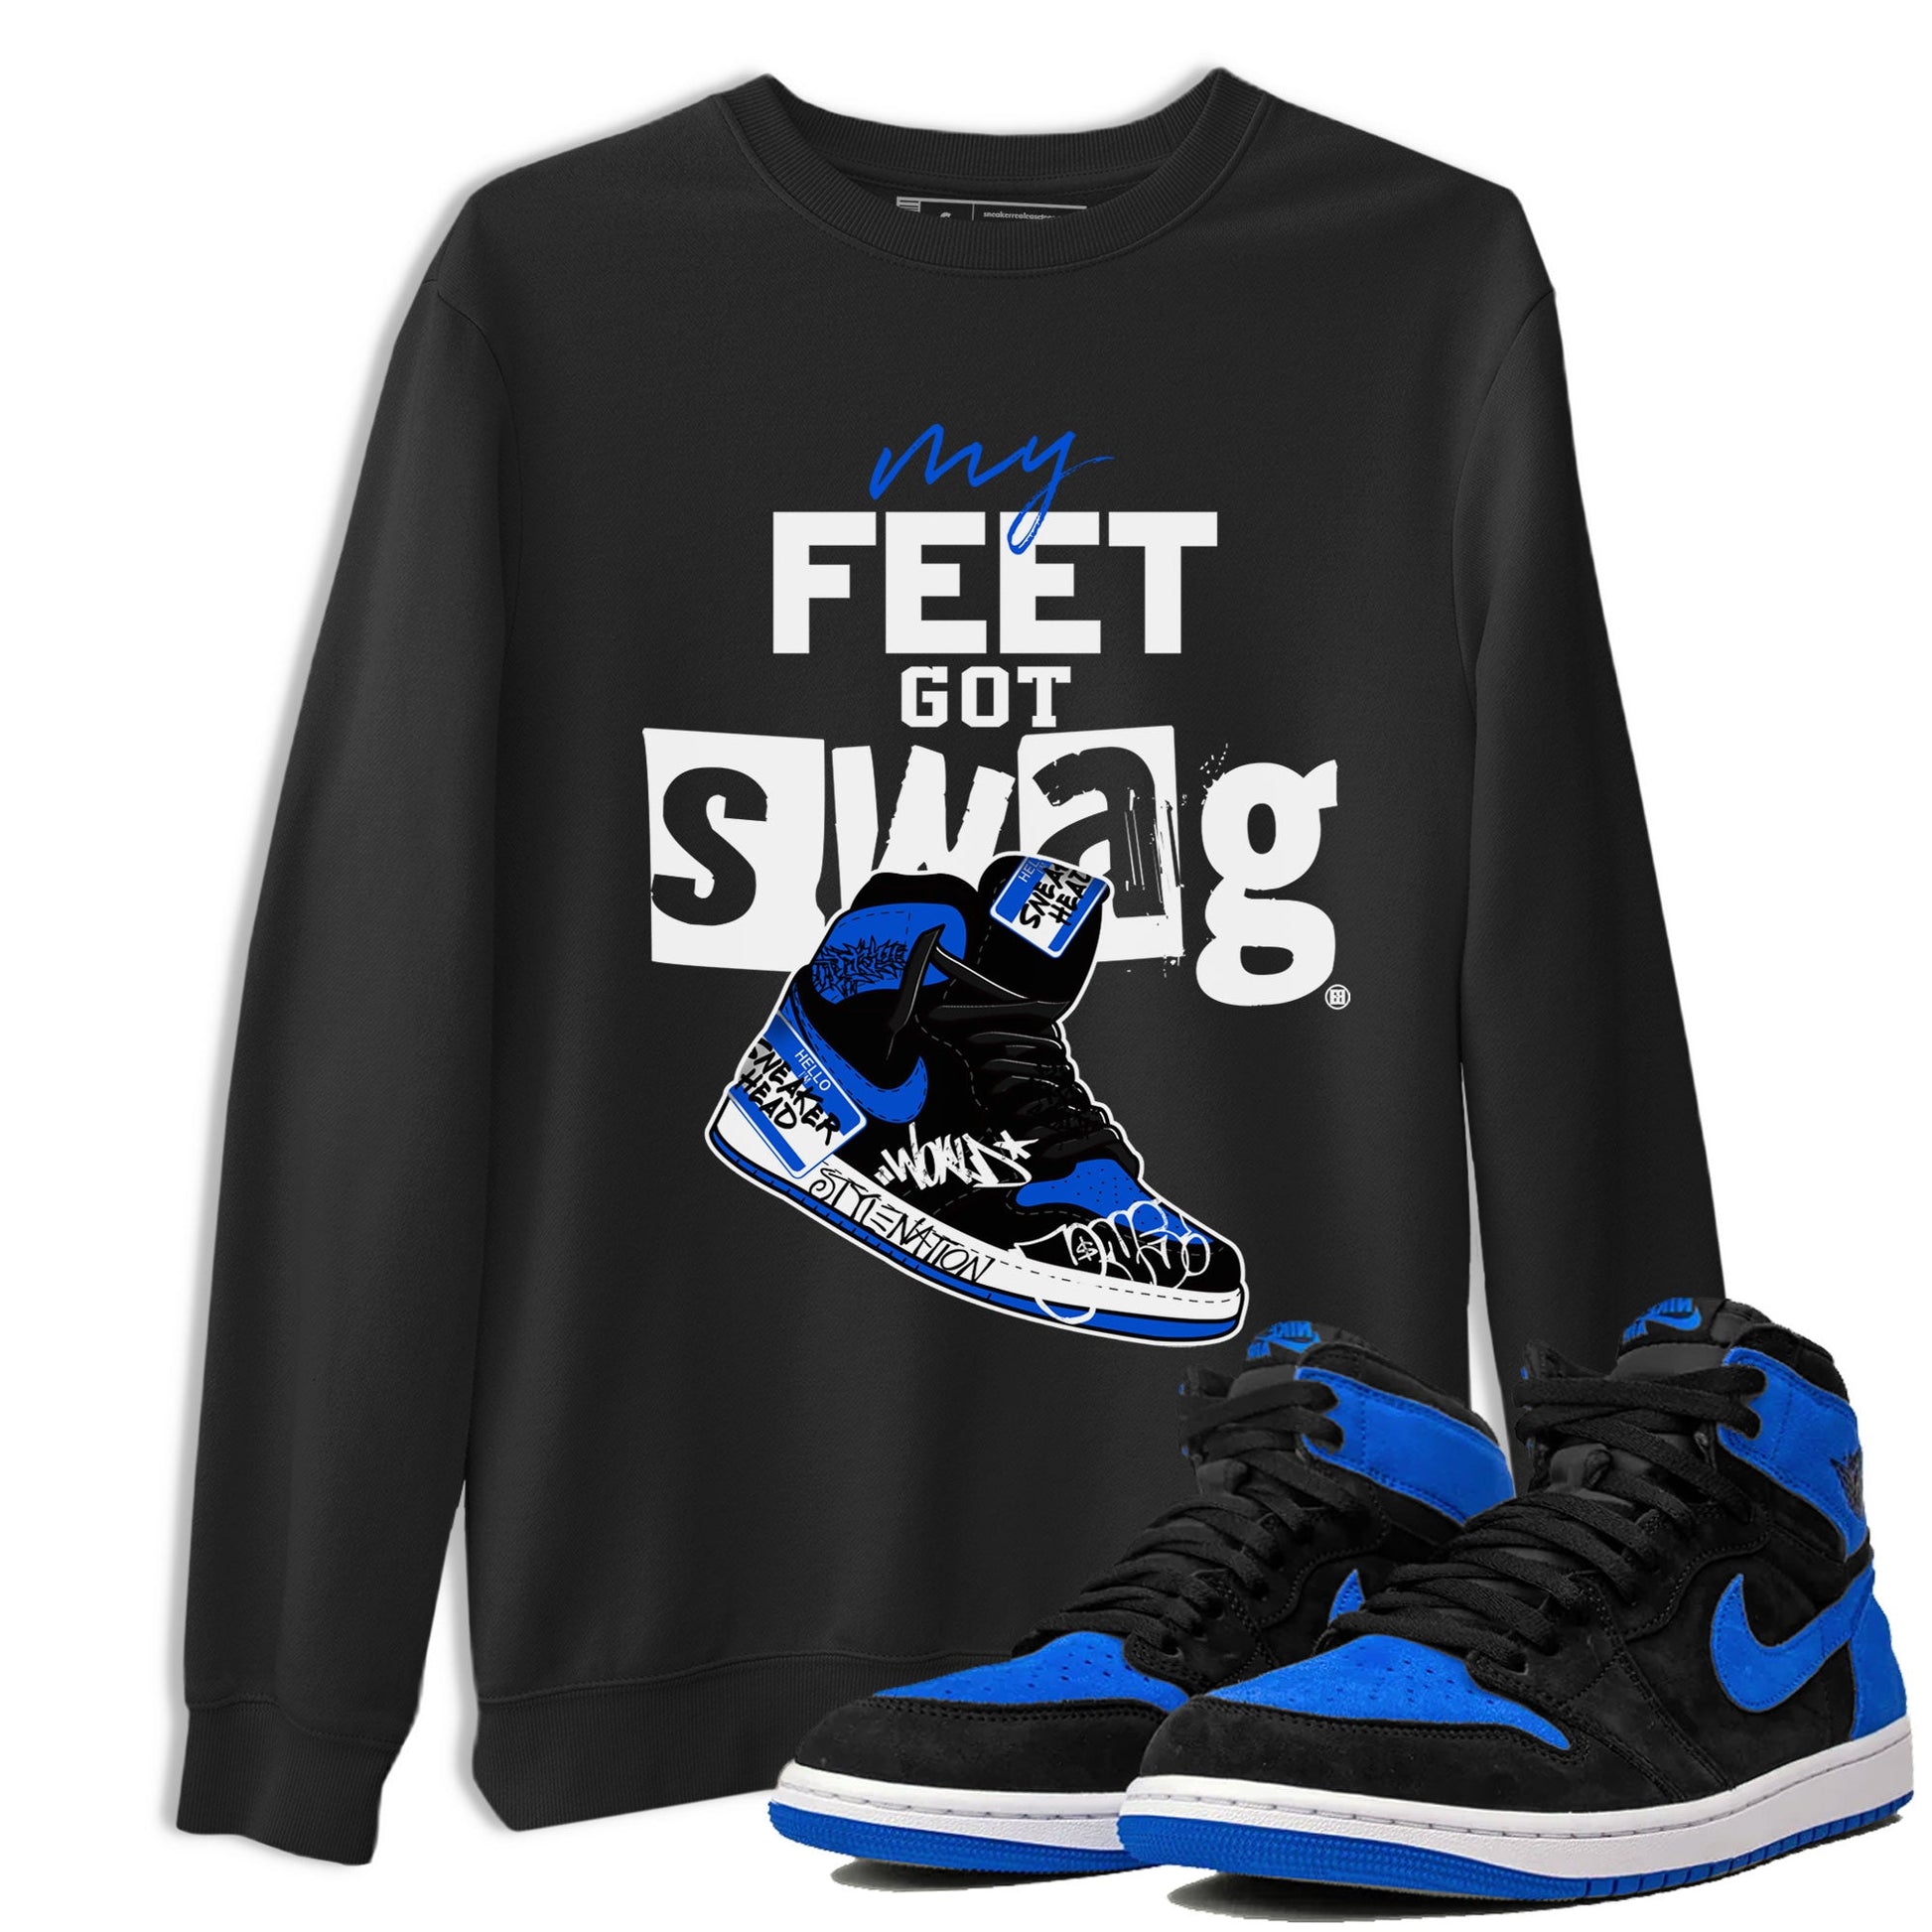 Pin by Anthony on shoes/sneakers  Disney shoes, Jordan swag, Swag men